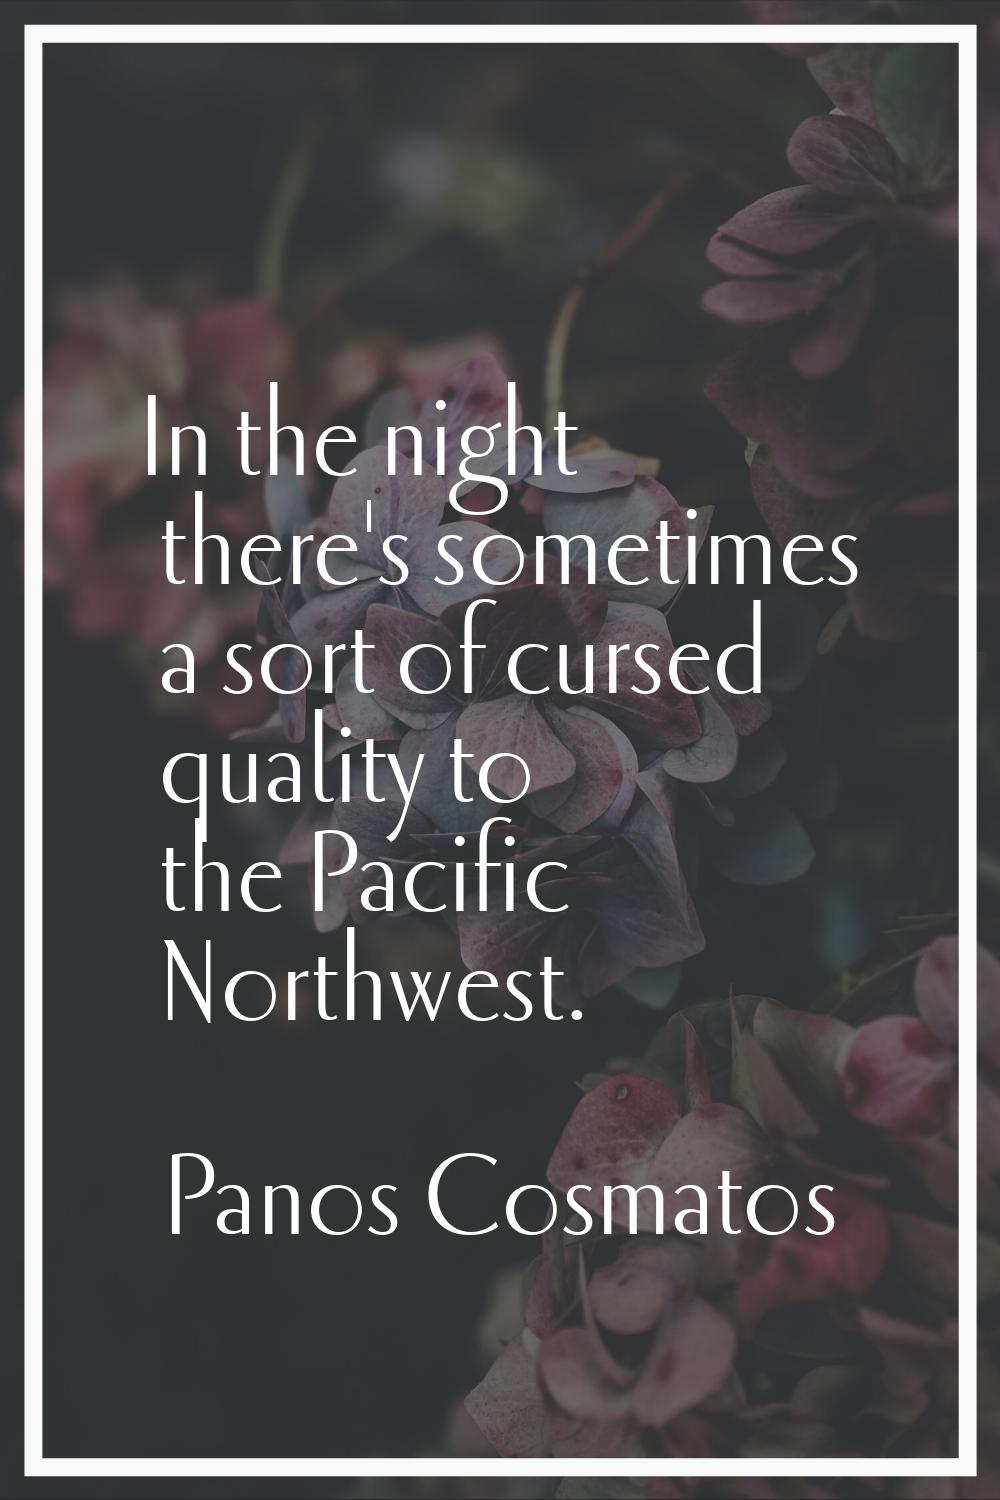 In the night there's sometimes a sort of cursed quality to the Pacific Northwest.